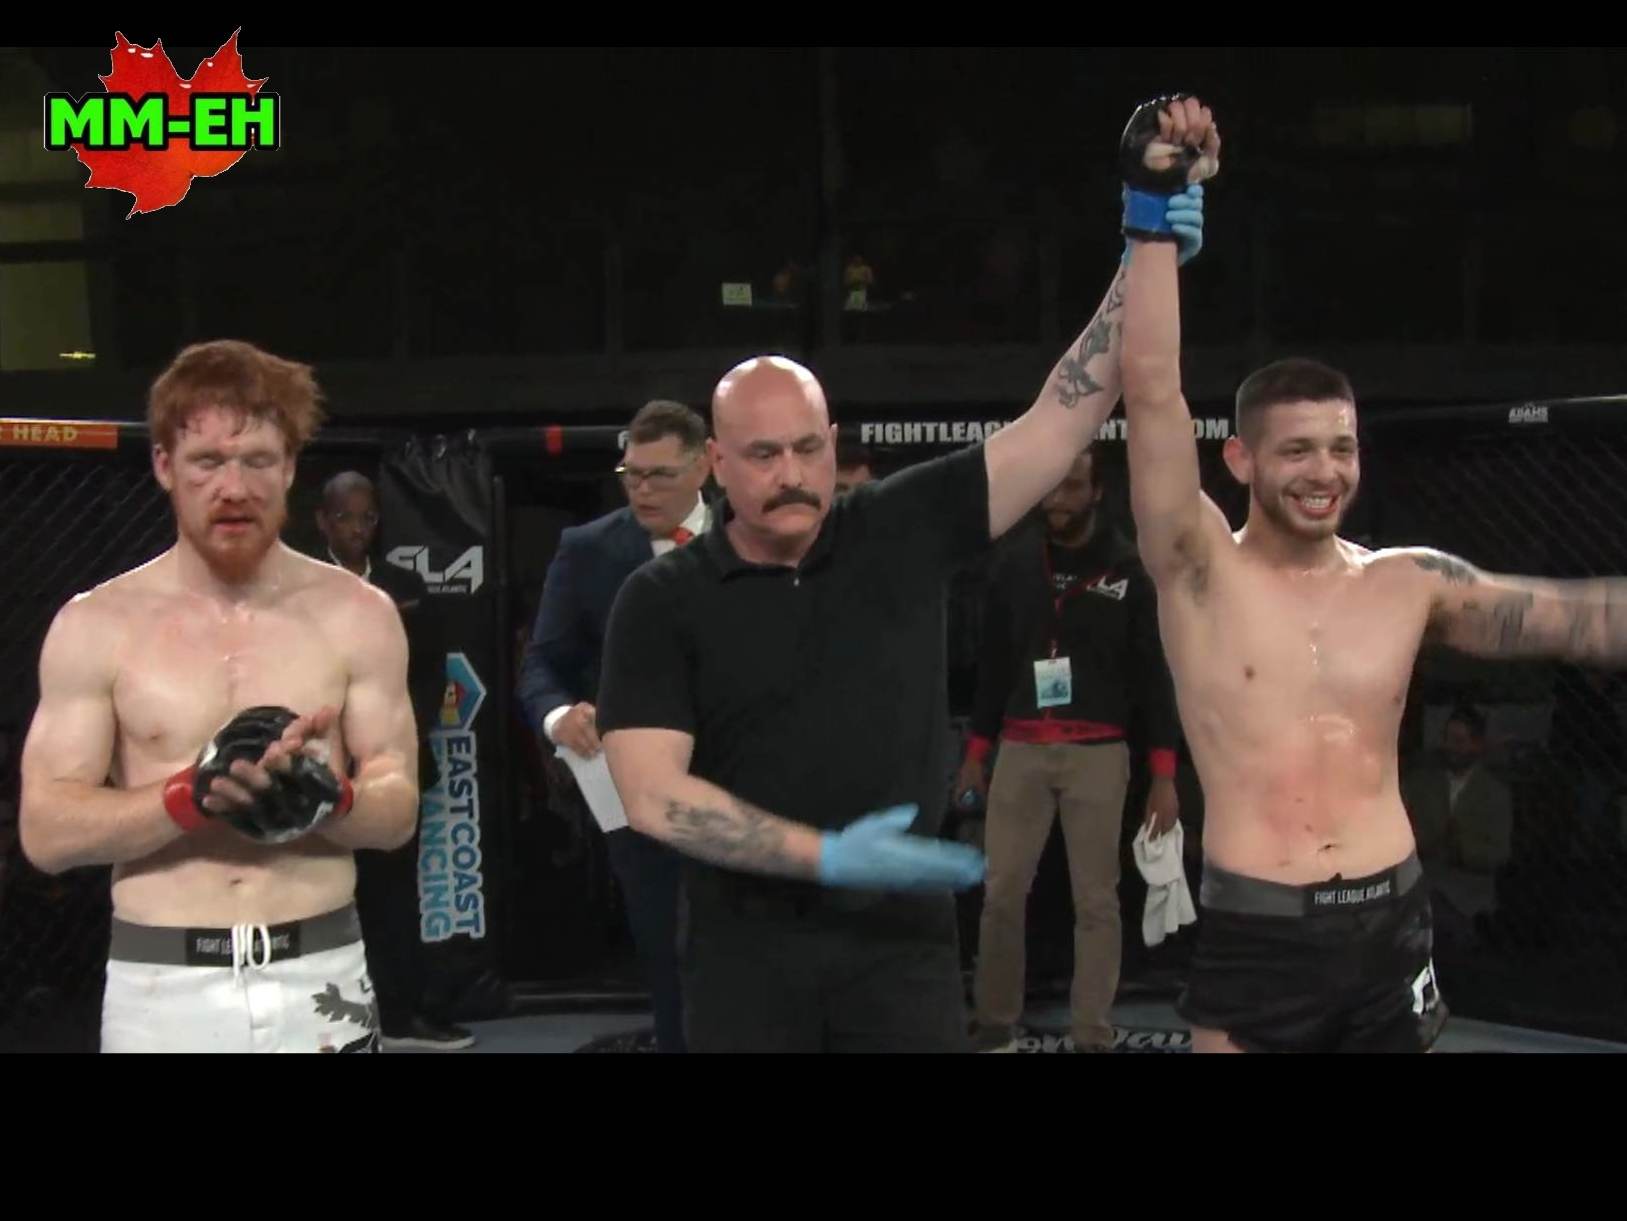 Fight League Atlantic 9 Live Results – MM-eh